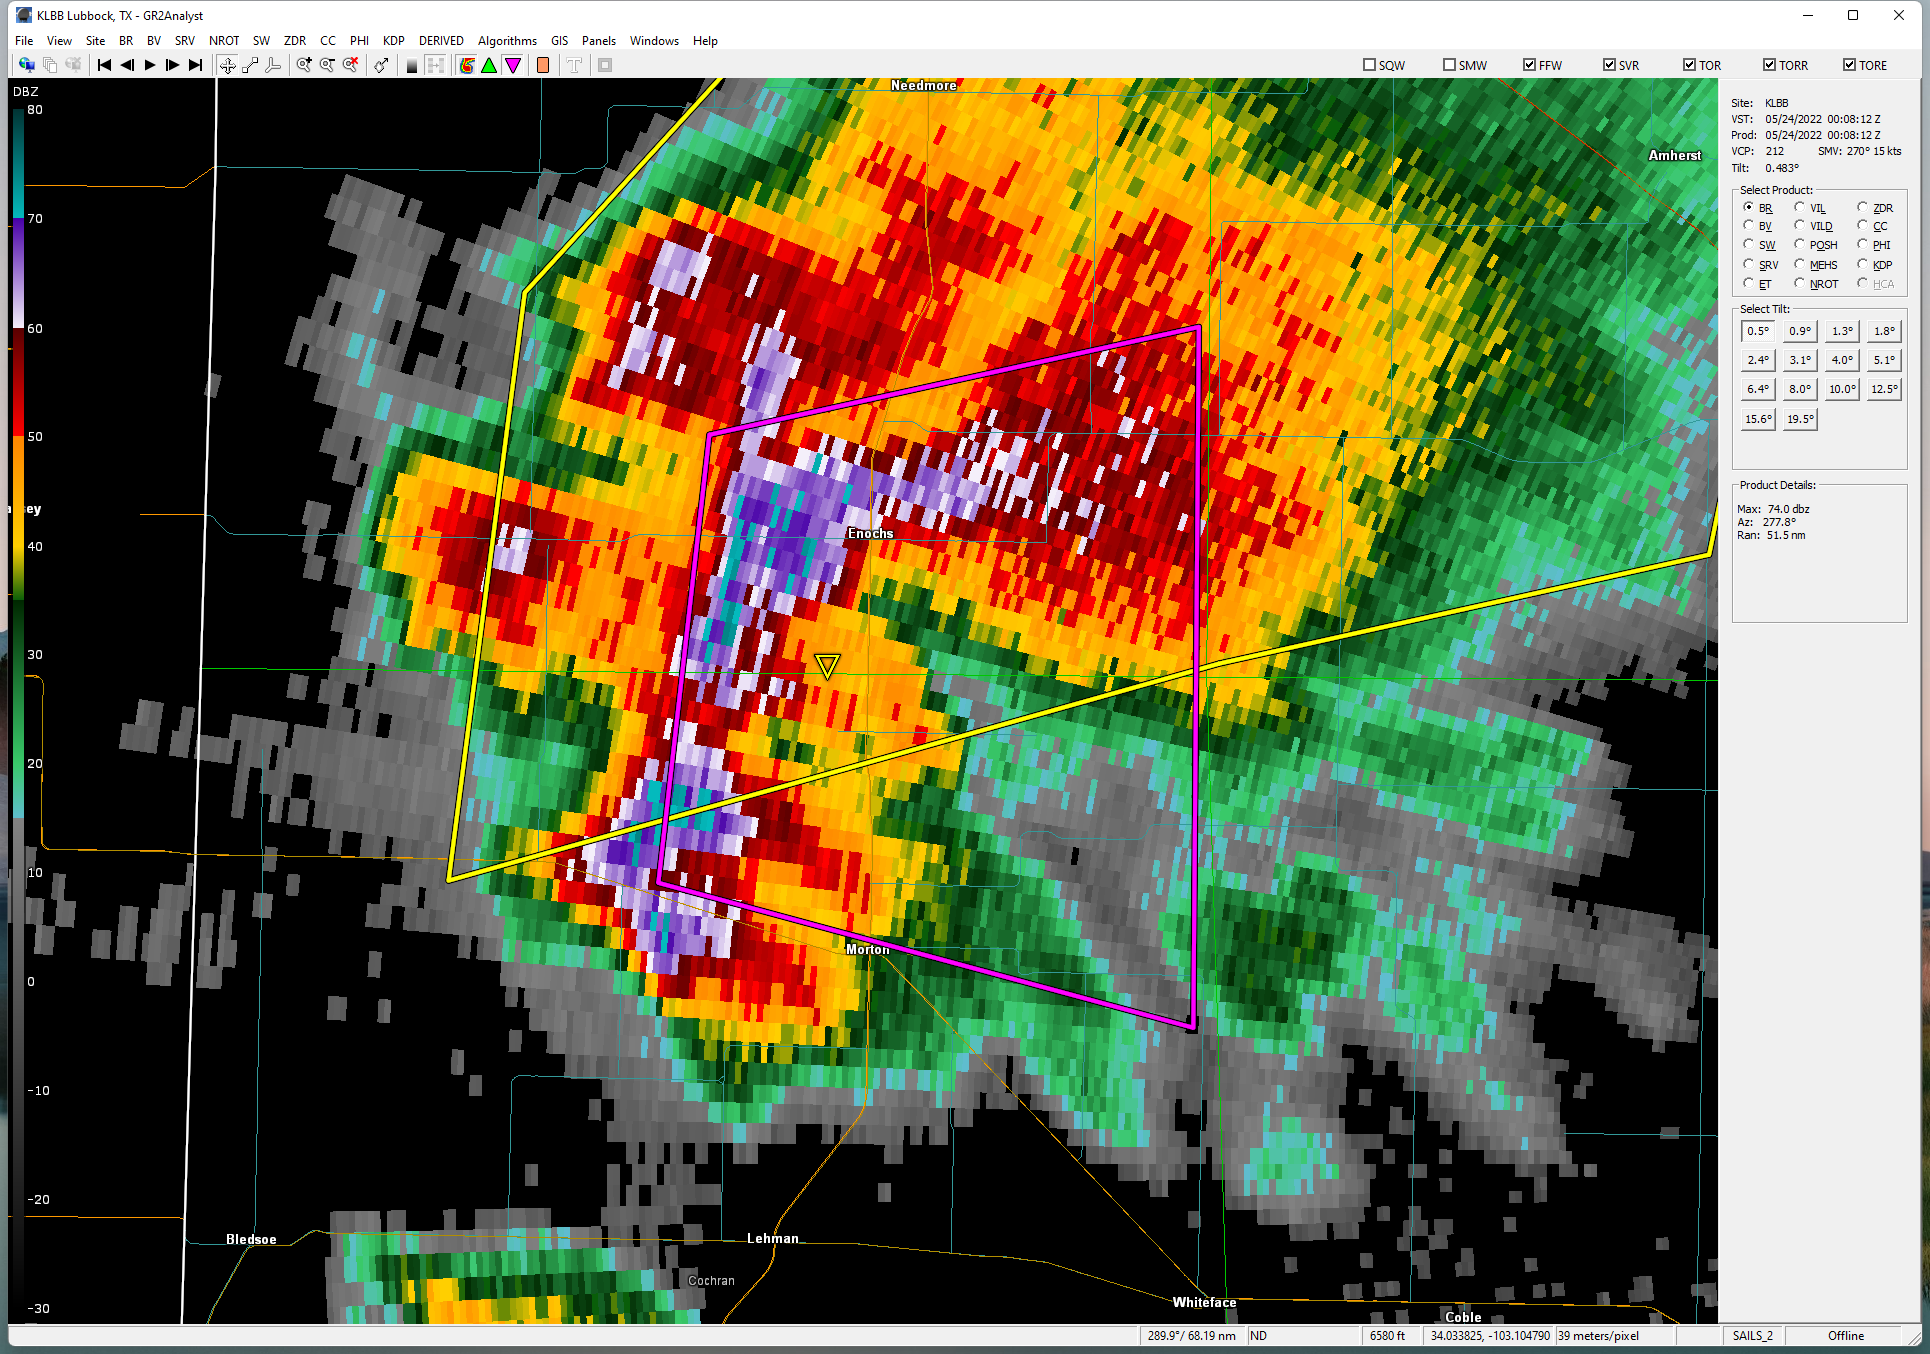 Lubbock WSR-88D 0.5 degree reflectivity data valid at 7:08 pm on 23 May 2022.